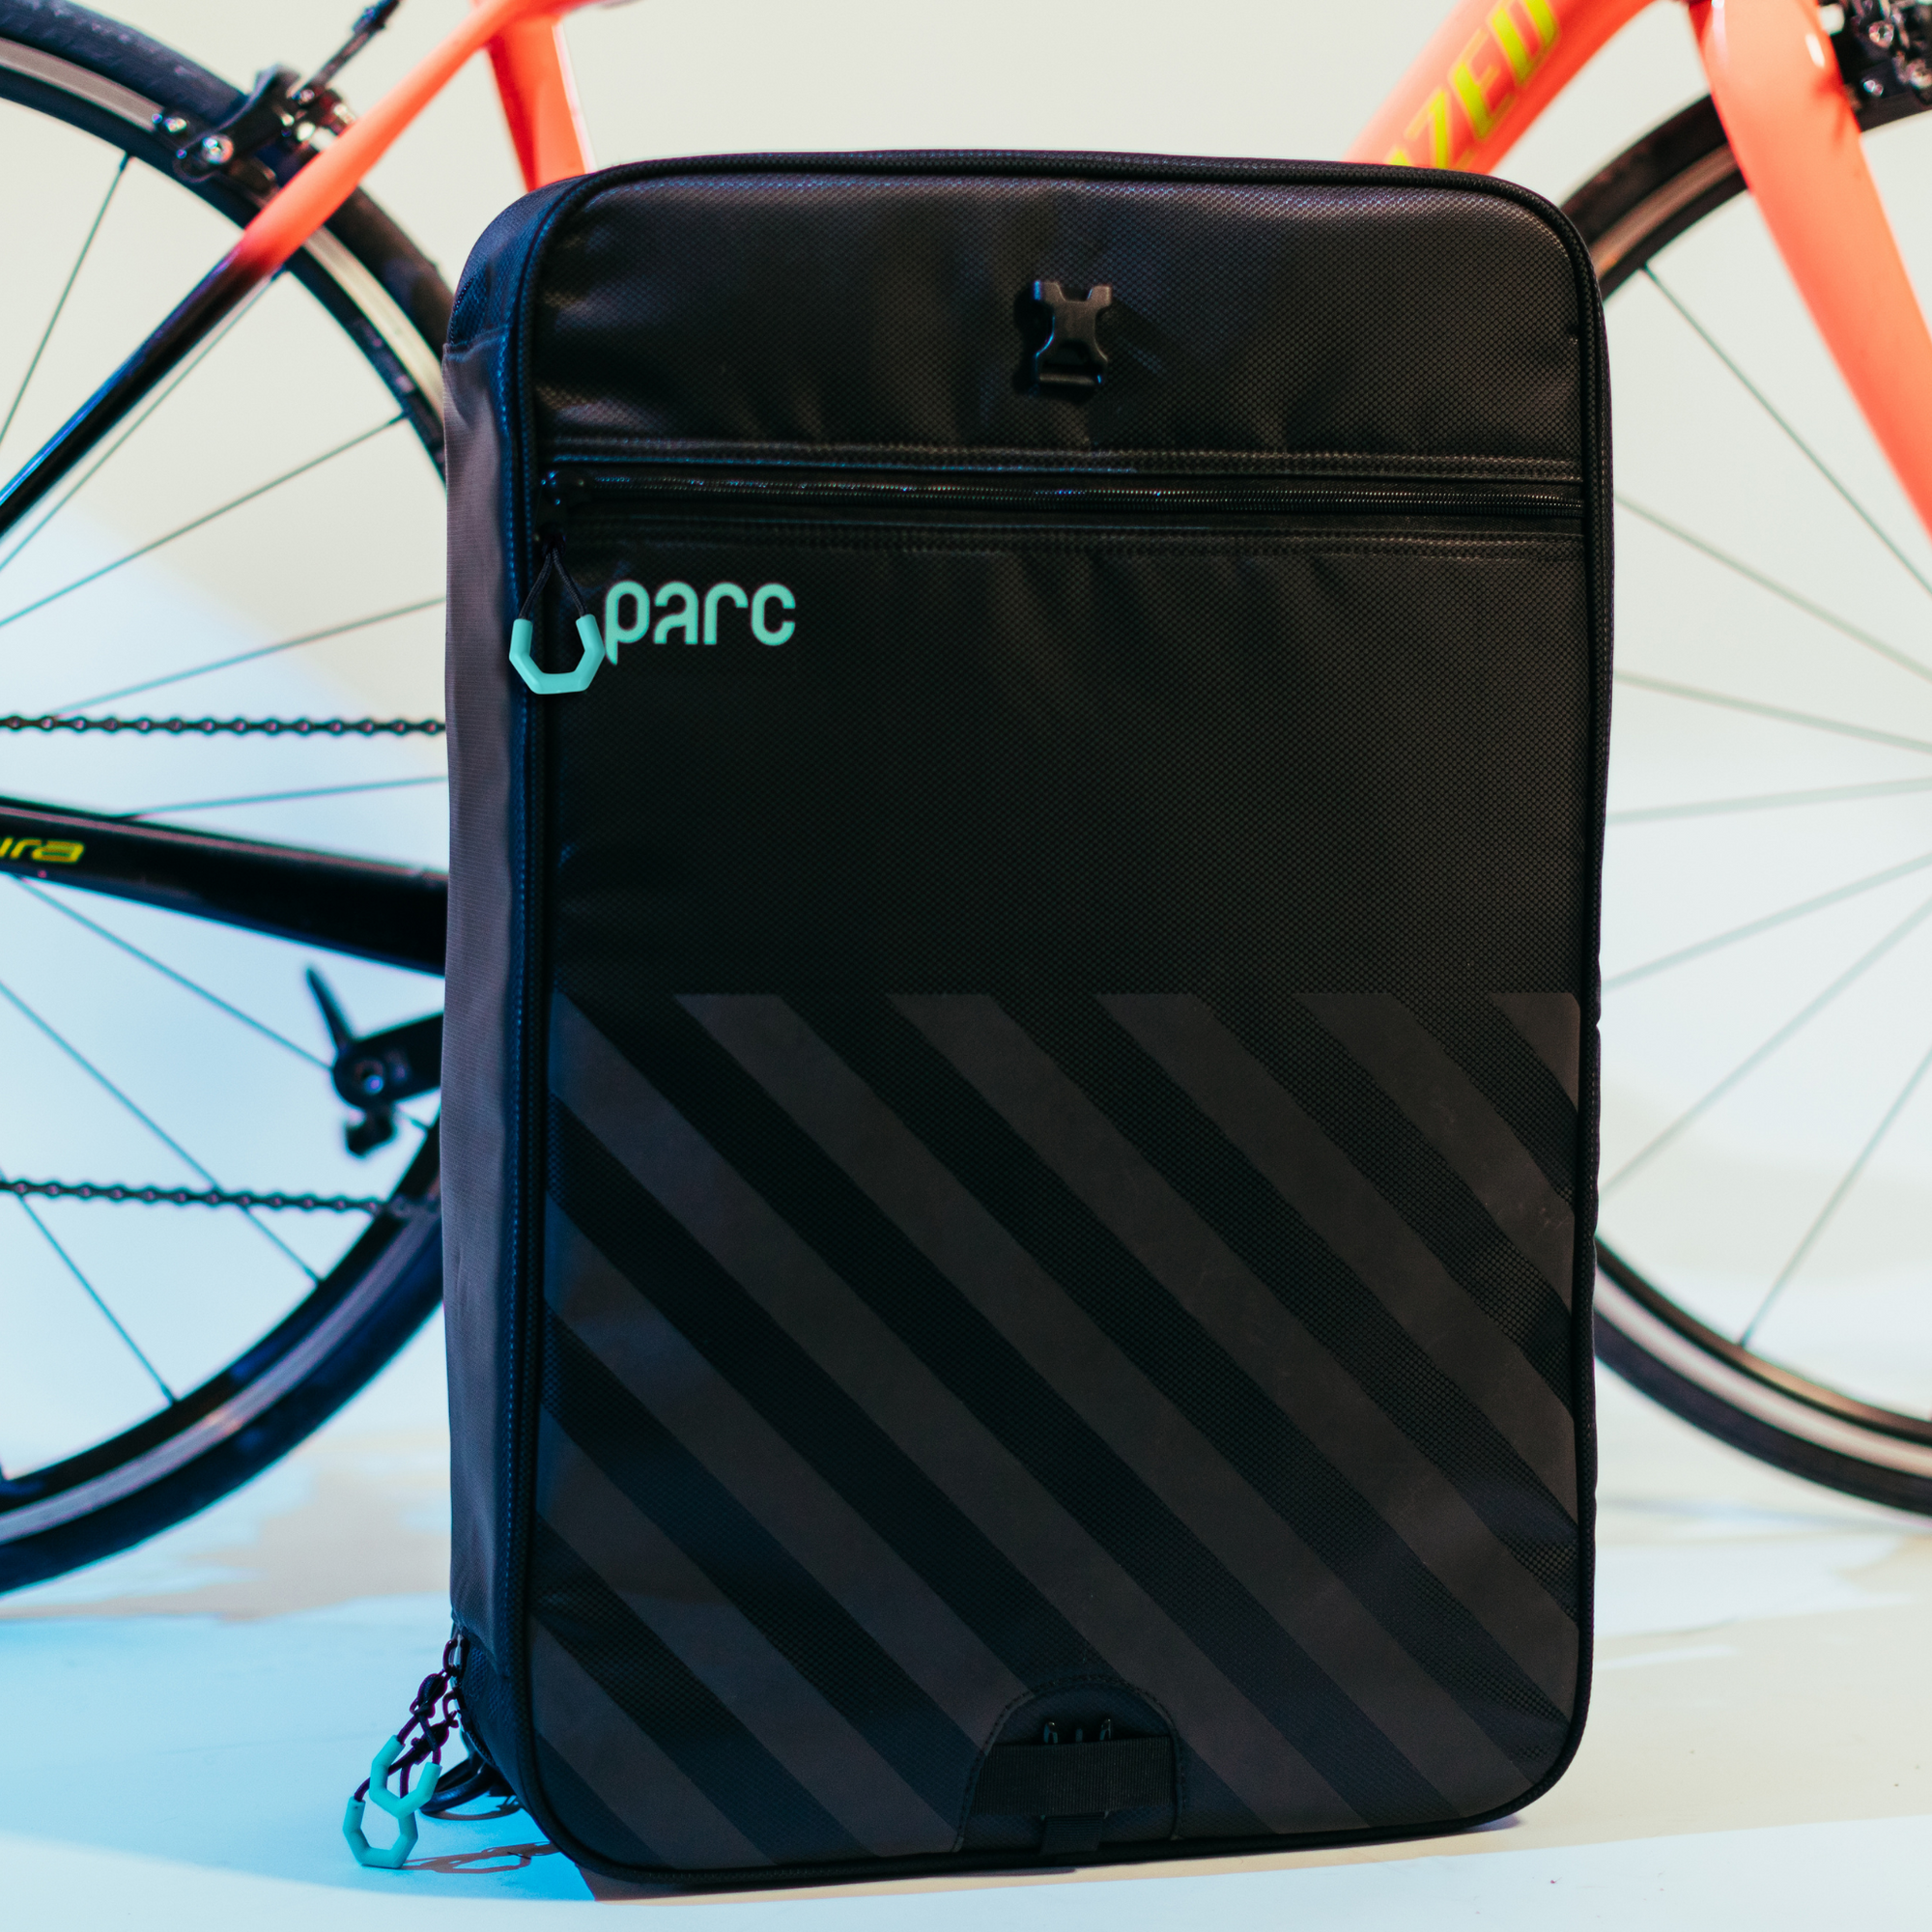 Parc cycling gear bag zipped up and standing upright in front of a road bike. A black bike gear bag with turquoise Parc logo and zipper pulls and black reflective stripes.